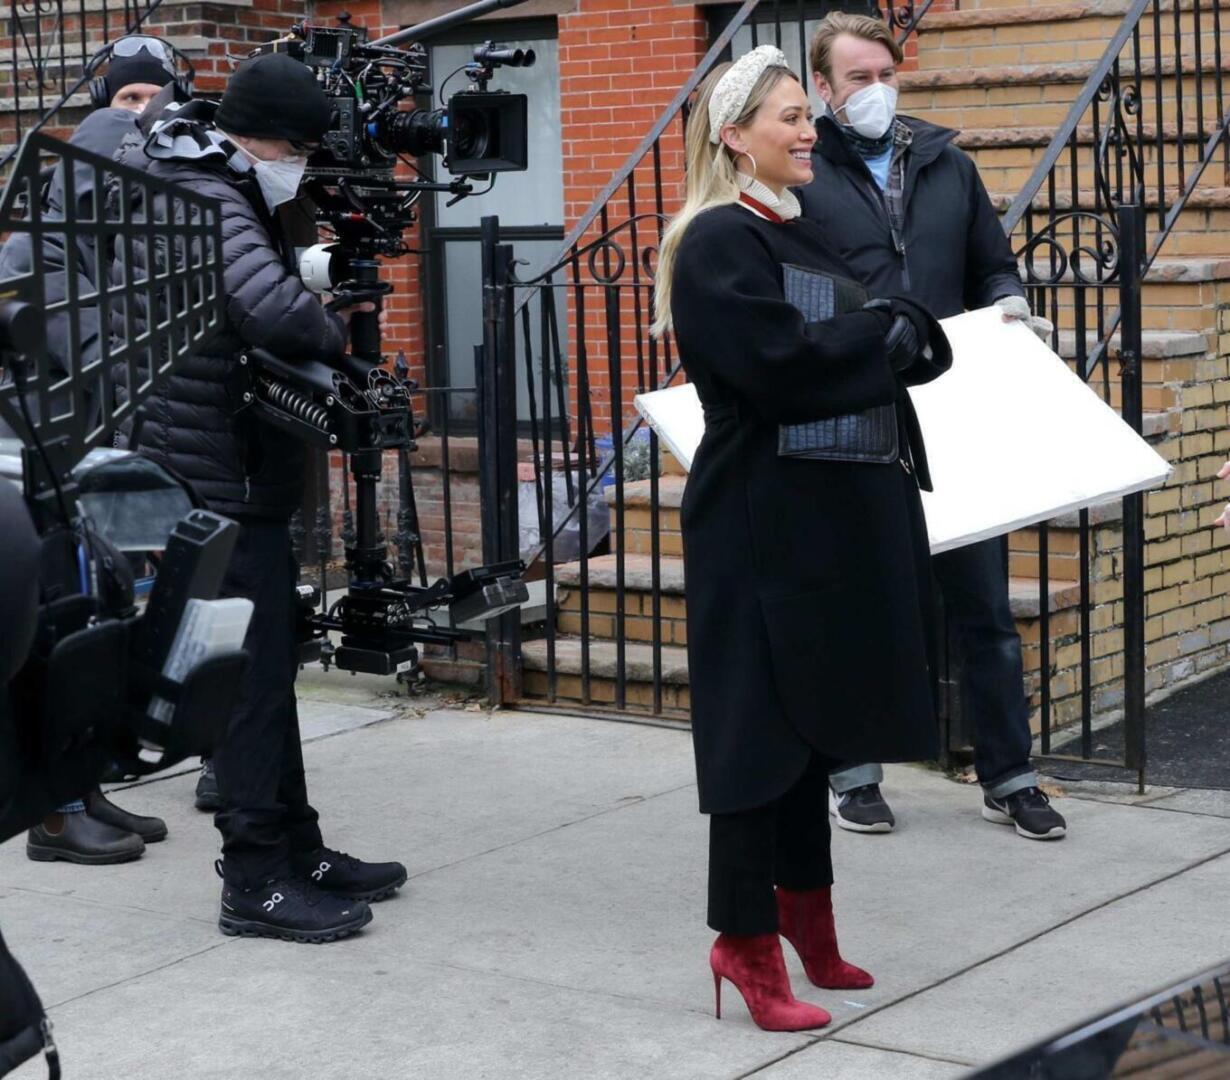 Hilary Duff - New York, NY | On set of 'Younger' | Hilary Duff style